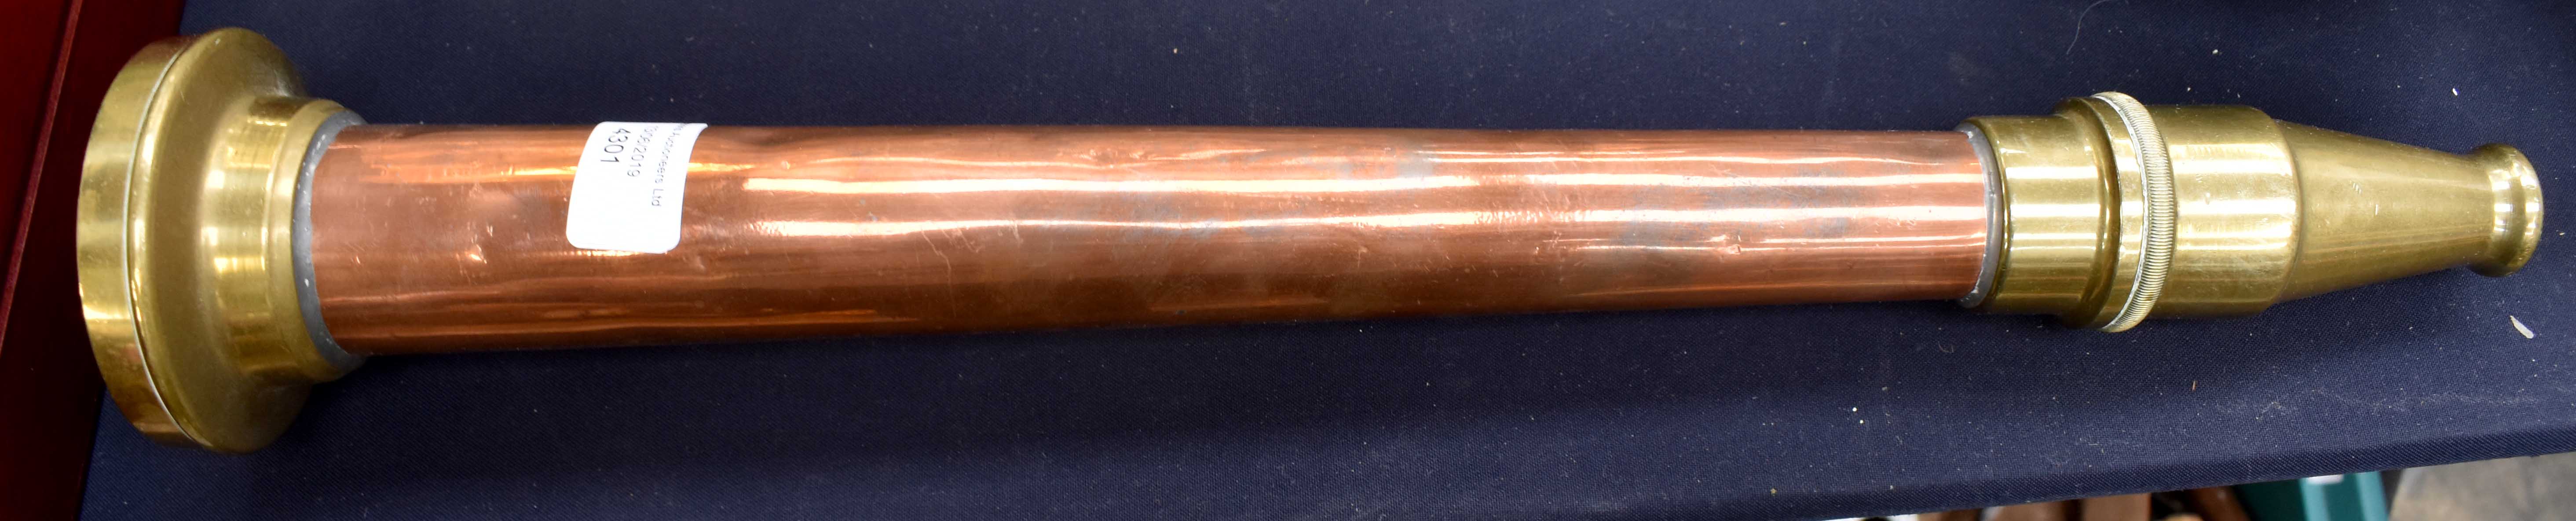 Fire Brigade Copper and Brass Fire Hose Nozzle. 51 cm in length. No makers markings. 15 mm nozzle.